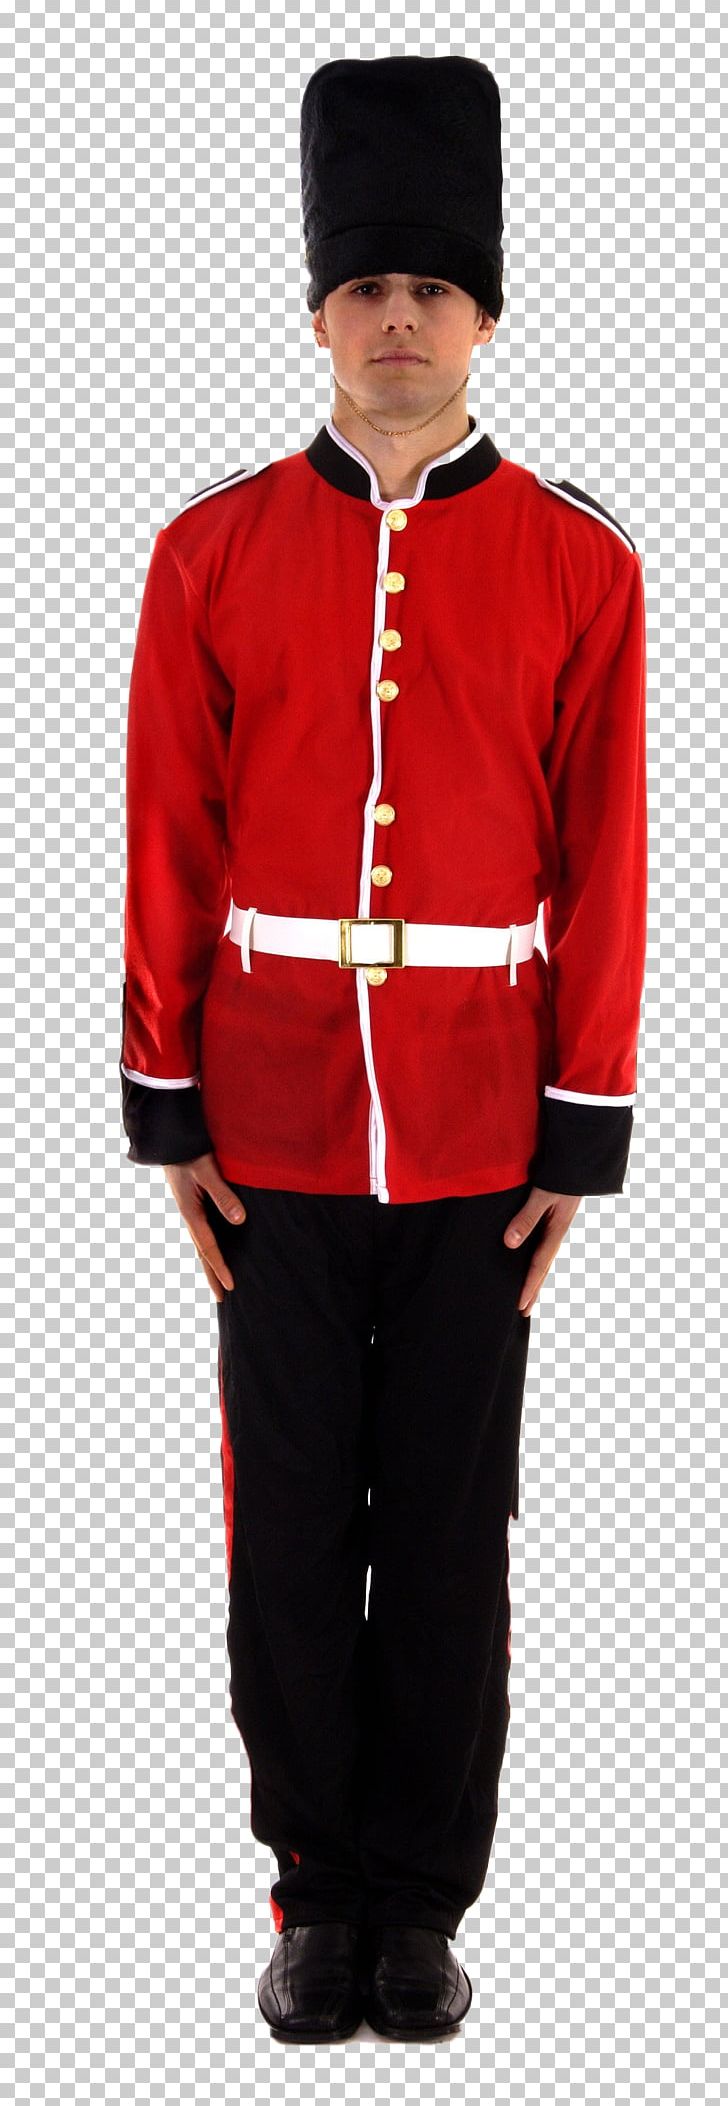 United Kingdom Costume Party Queens Guard Royal Guard Png - queens guard costume